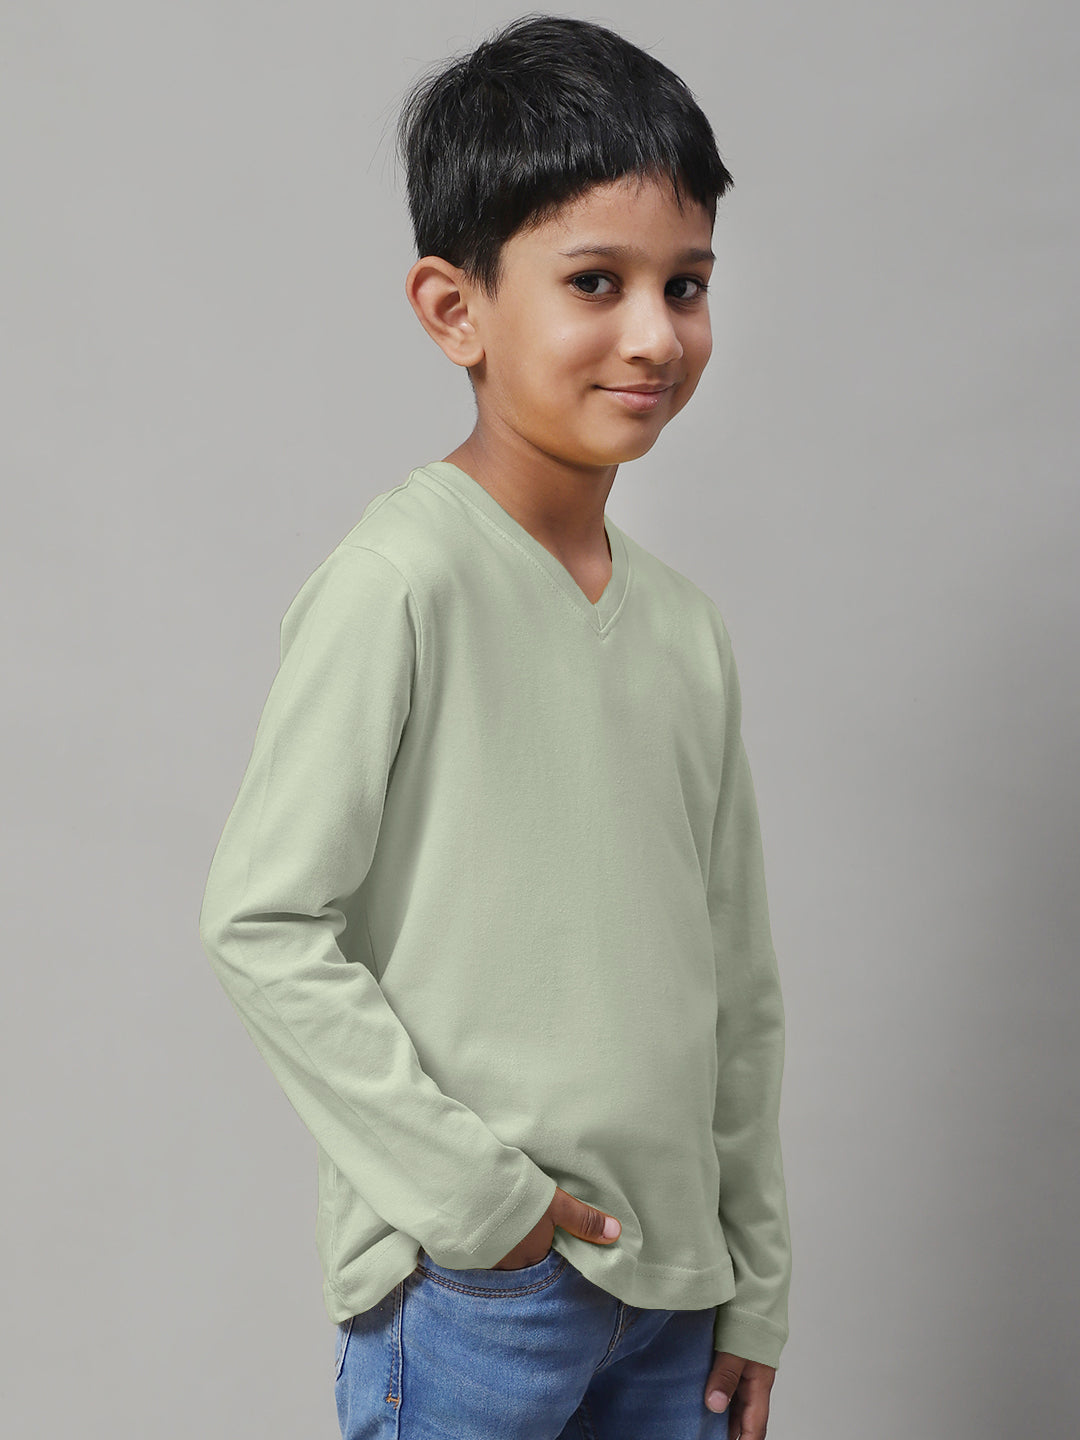 Classic Full Sleeves V-Neck Solid 2-7Y Kids T-Shirt - Friskers